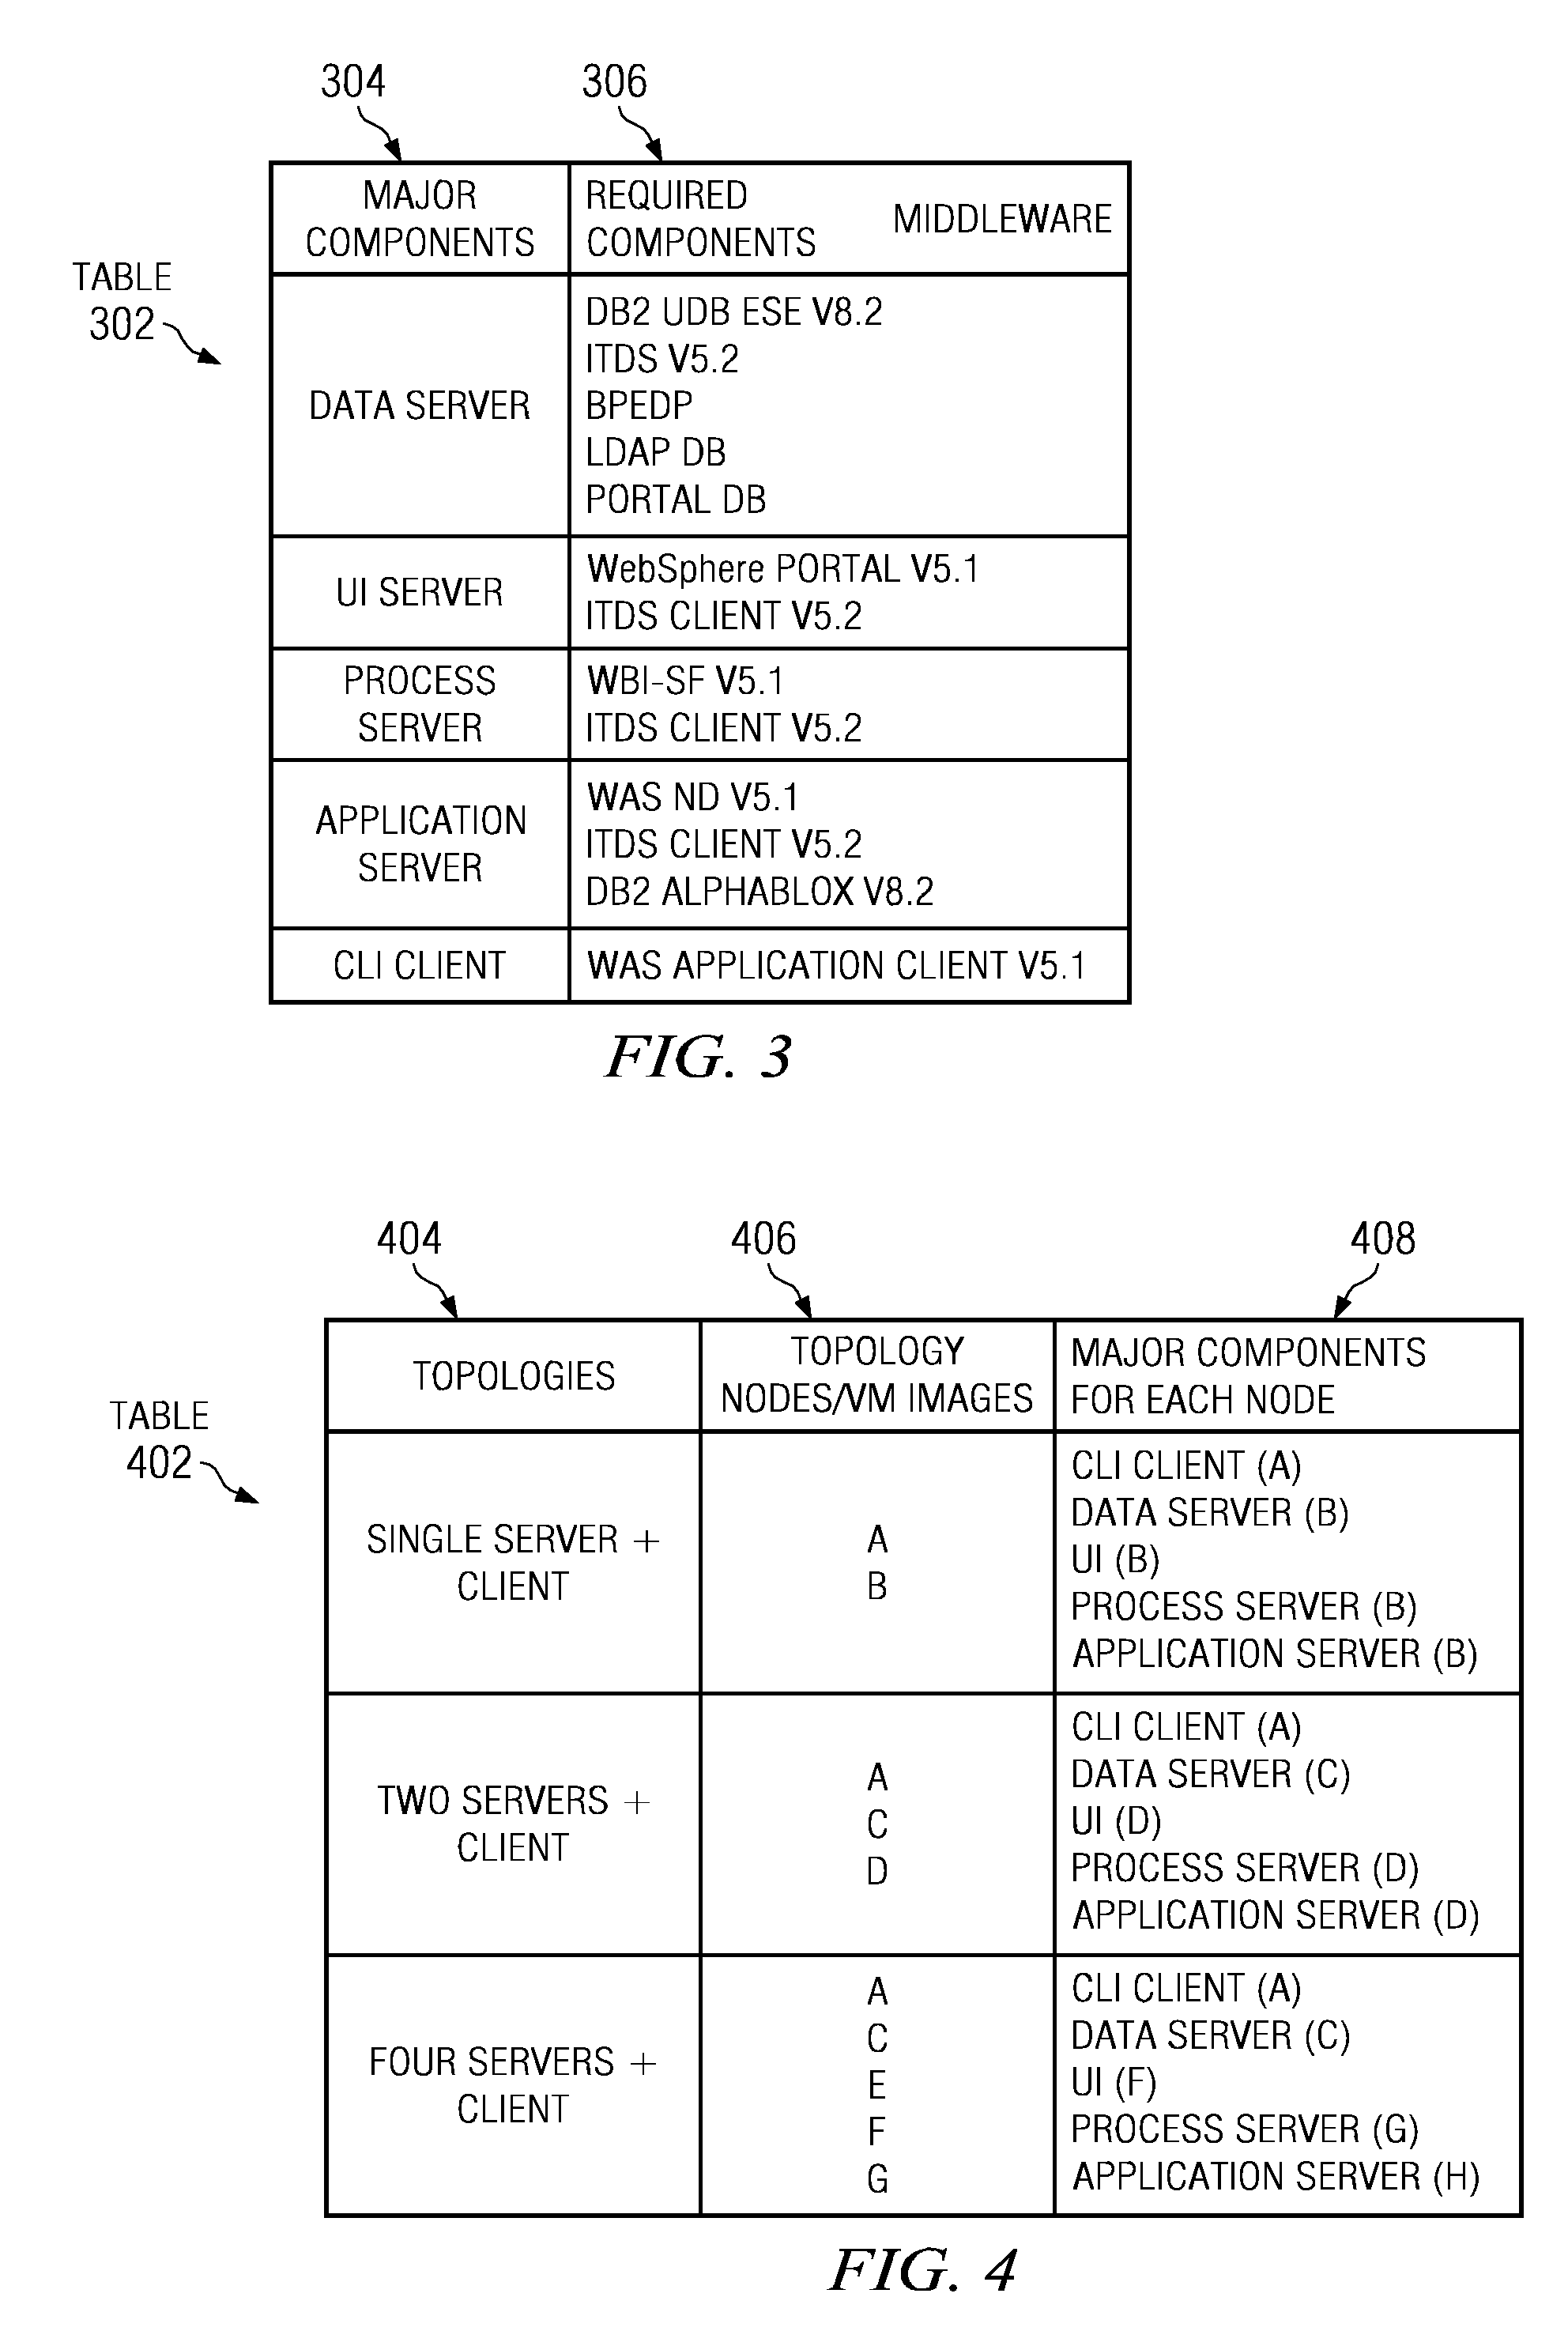 Method and apparatus for specifying an order for changing an operational state of software application components